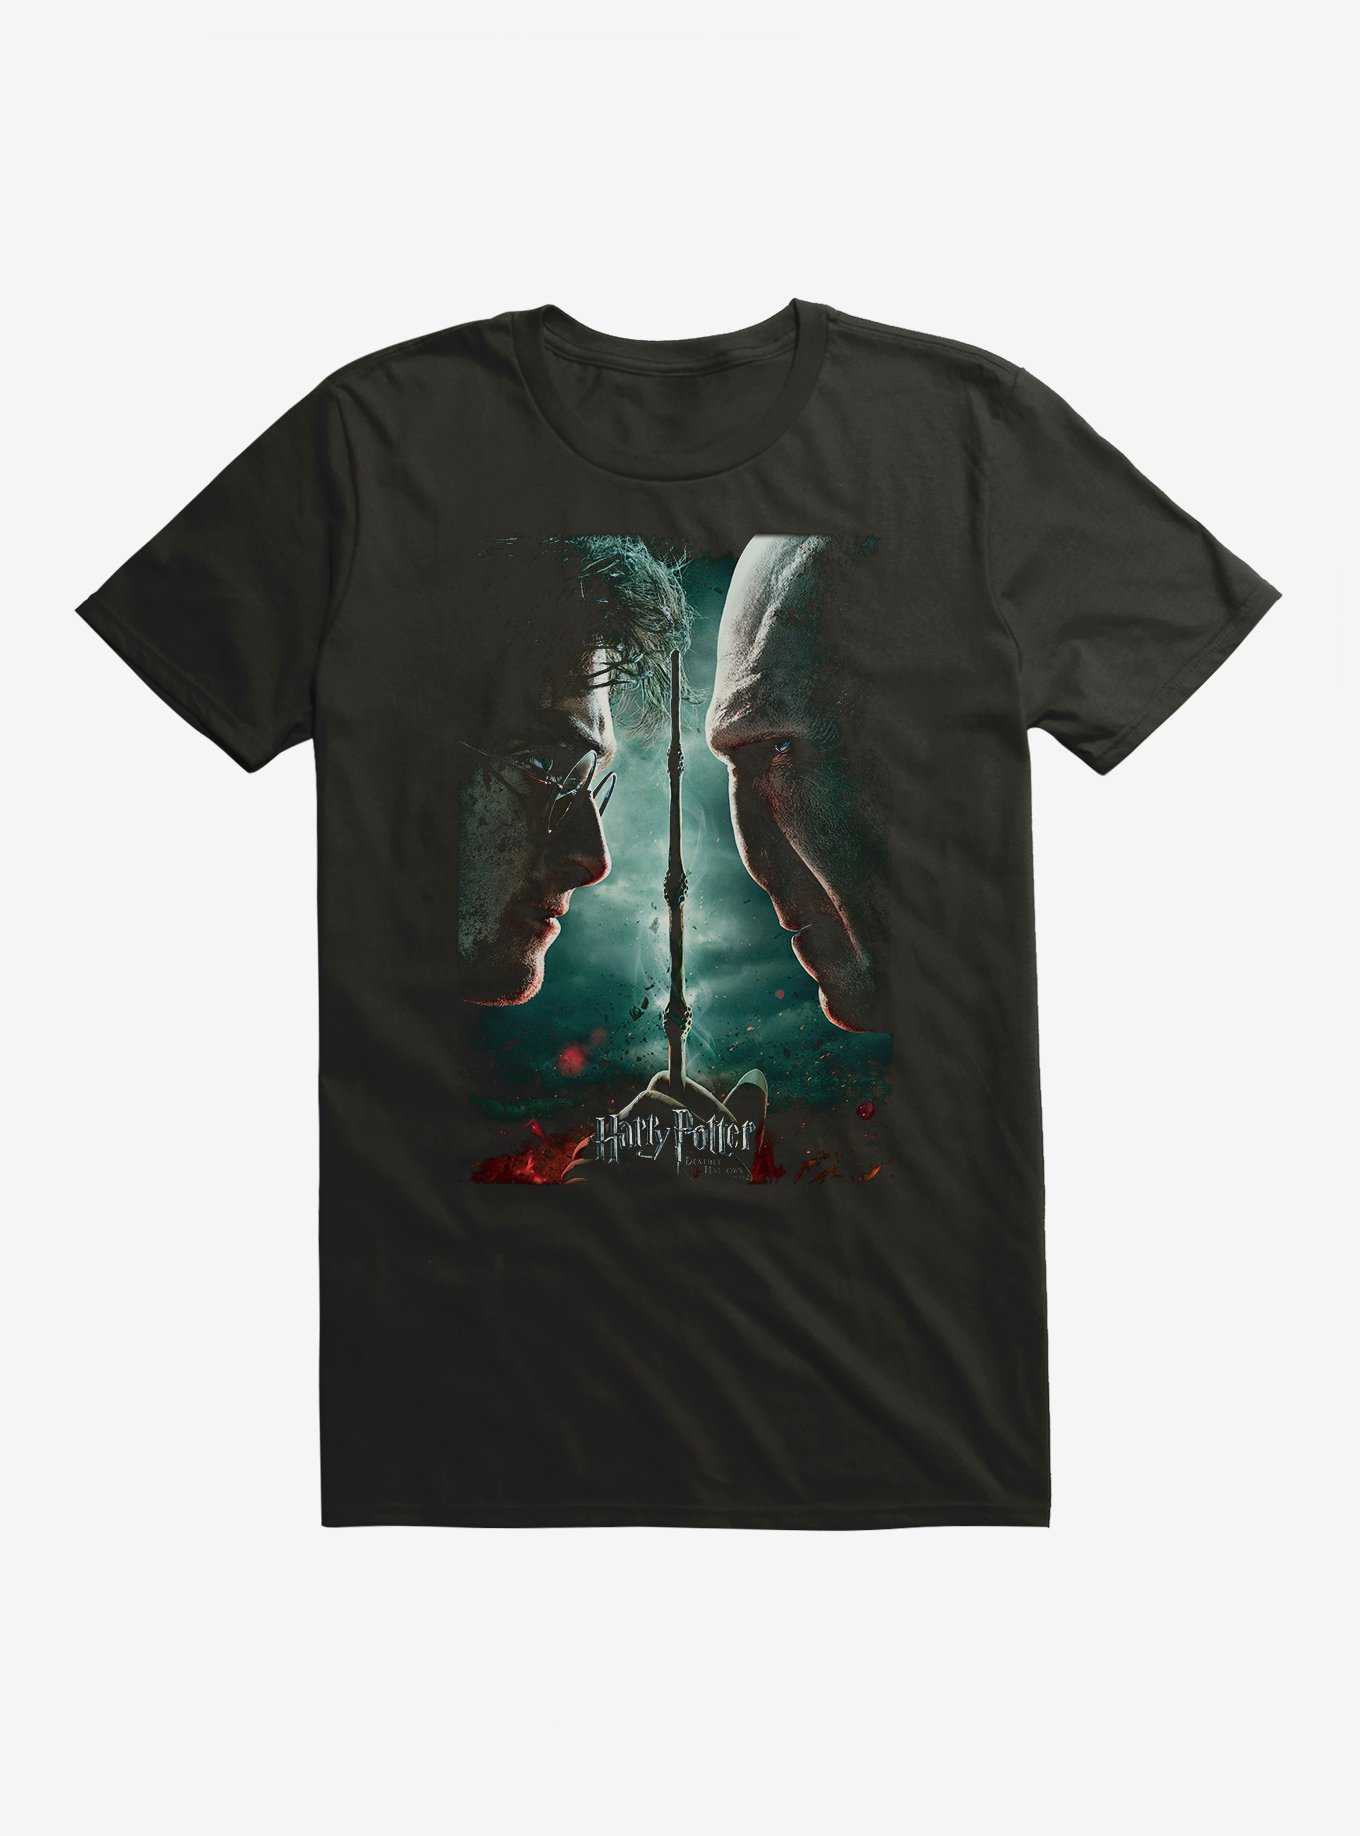 Harry Potter Deathly Hallows Part 2 Movie Poster T-Shirt, , hi-res